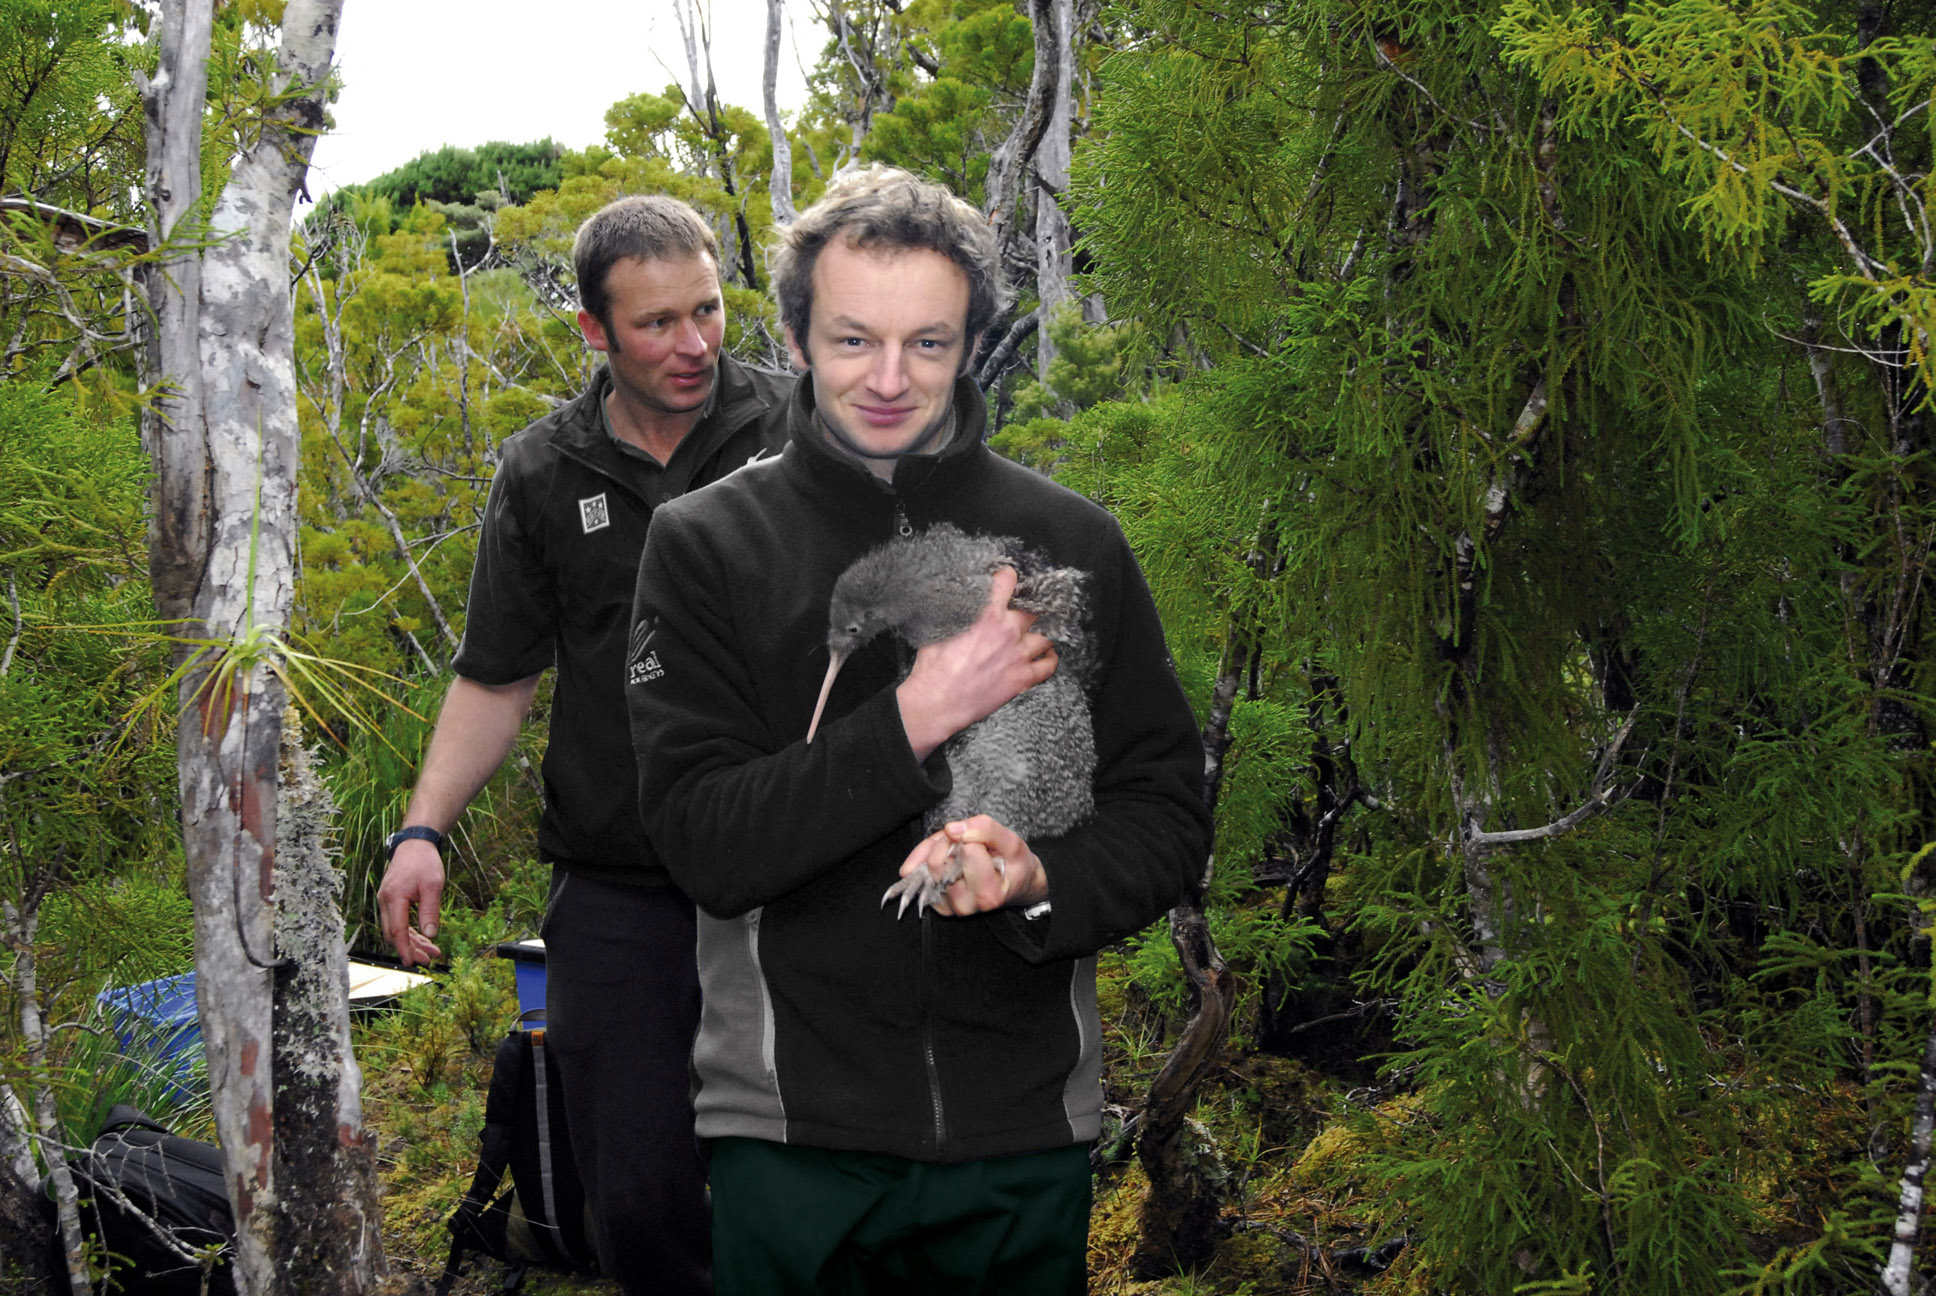 Real Journeys Nature Guide holding Kiwi, part of conservation project